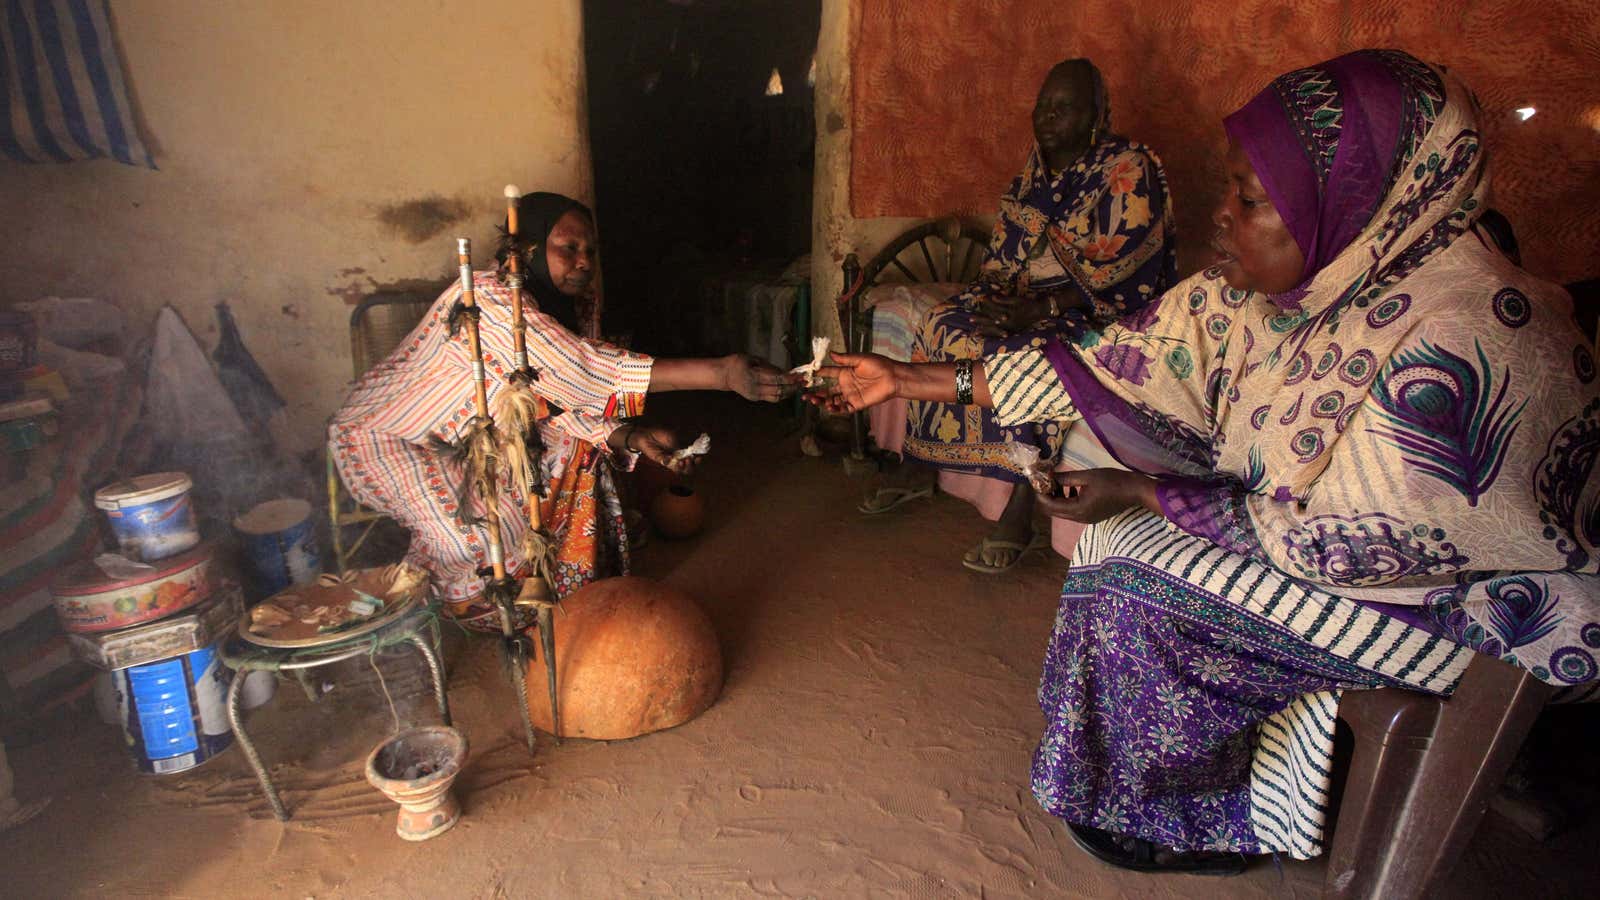 A patient receives medicine during her treatment with a spiritual and traditional healer in Sudan